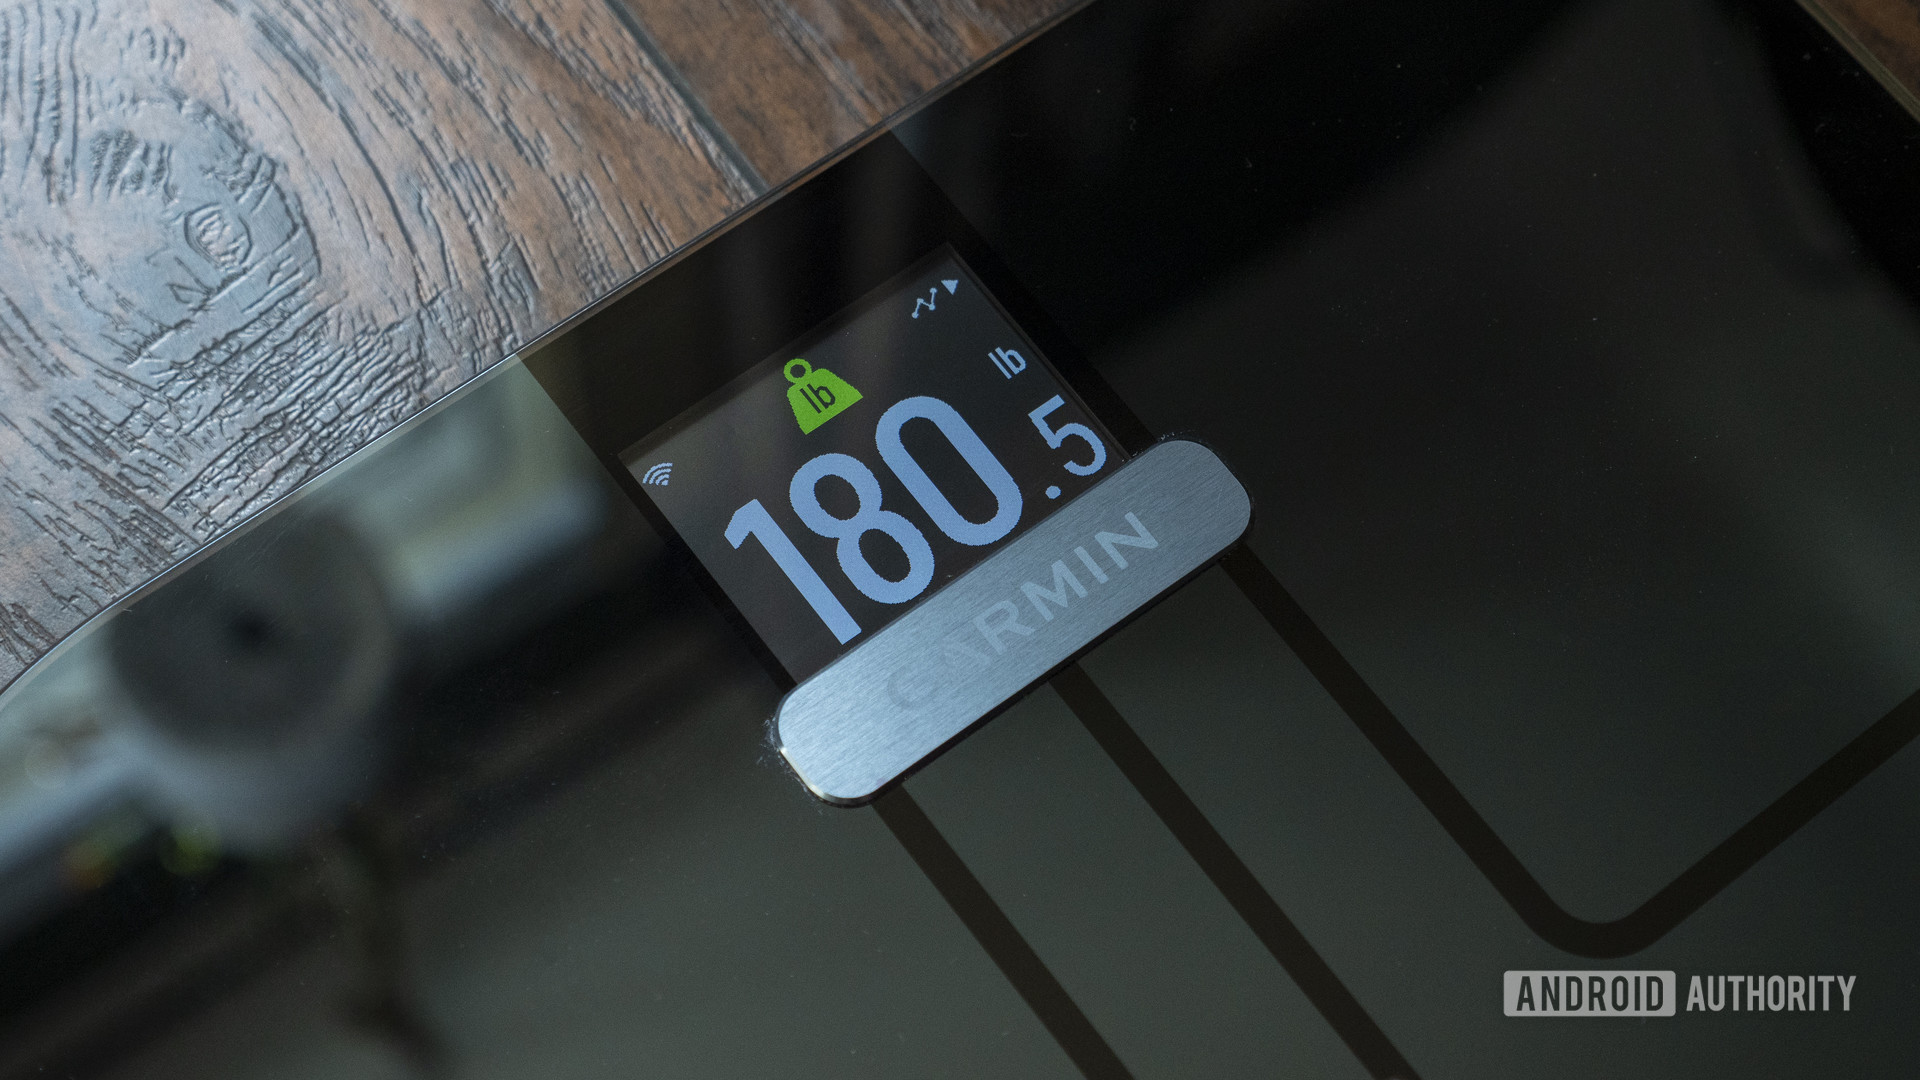 Index S2: A New Smart Scale by Garmin - Sports Tech and Wearables